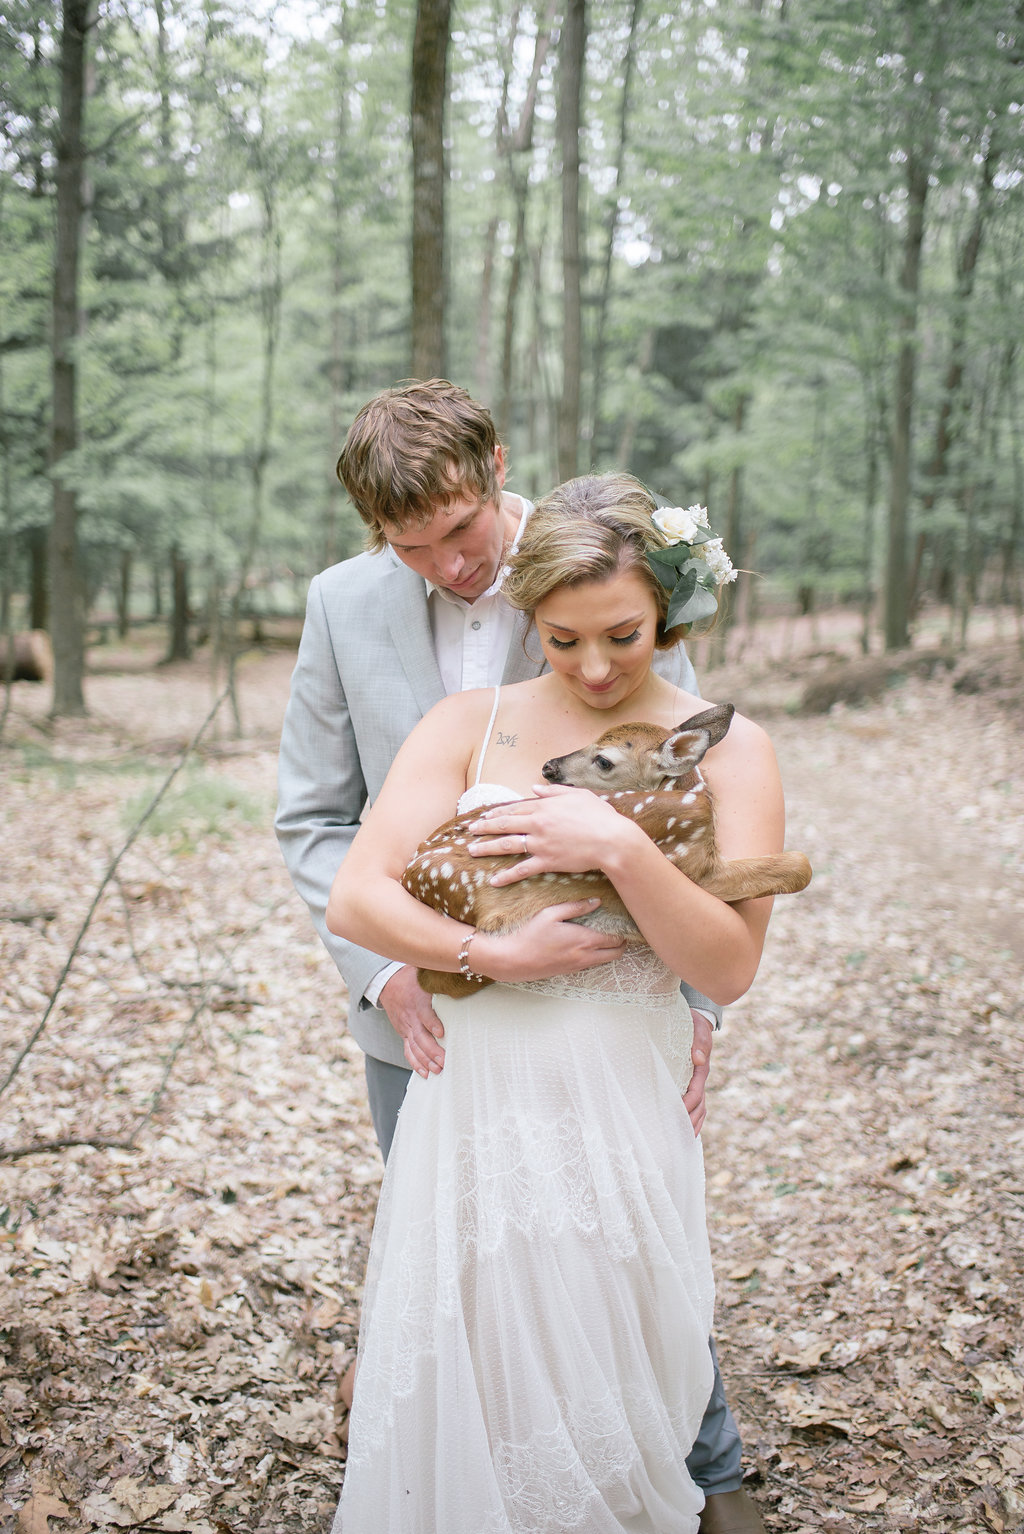 Fawn Weddng Pictures | Emilee Mae Photography | The Day's Design 